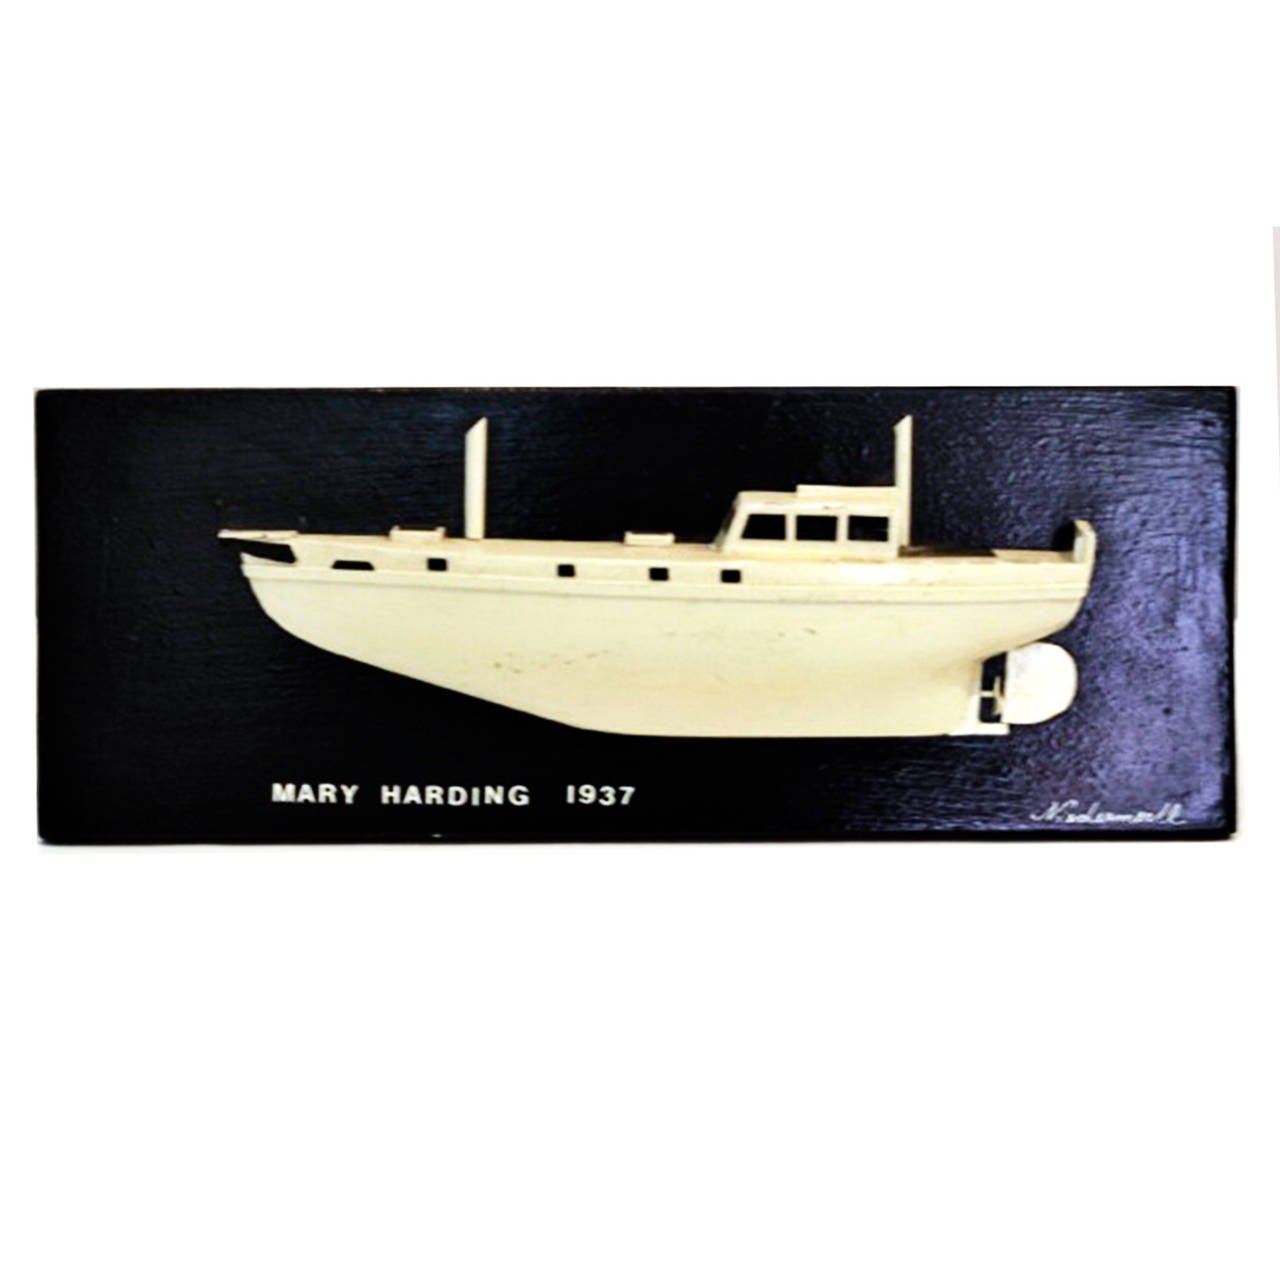 Hand painted wooden ship plaques in high relief. Six model ships, named and dated from 1895-1967, circa mid 20th century.